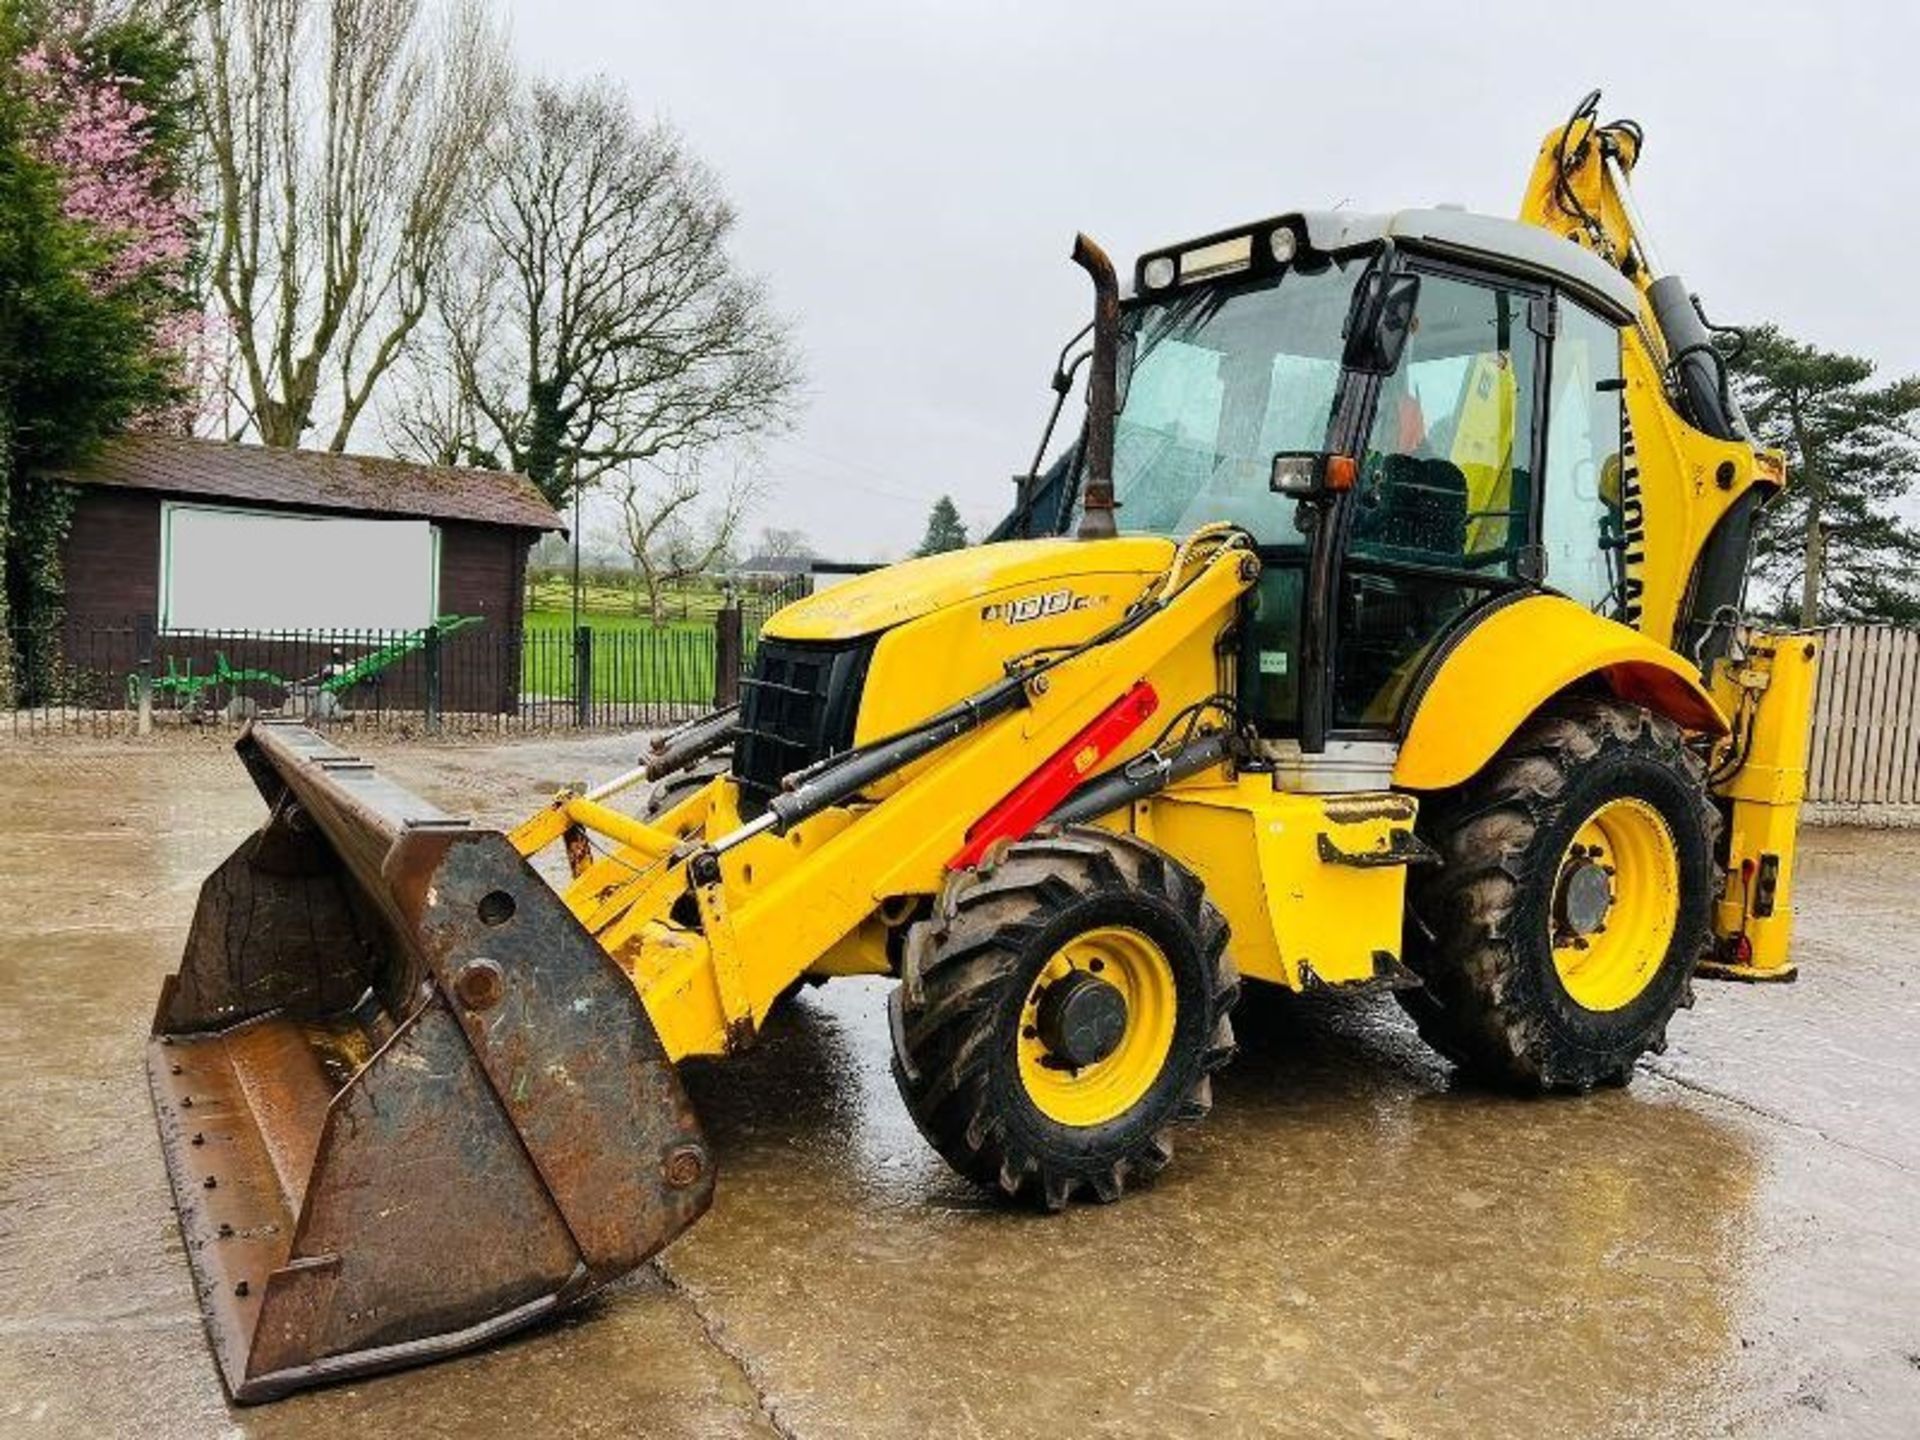 NEW HOLAND B100C 4WD BACKHOE DIGGER *YEAR 2012* C/W EXTENDING DIG - Image 2 of 17